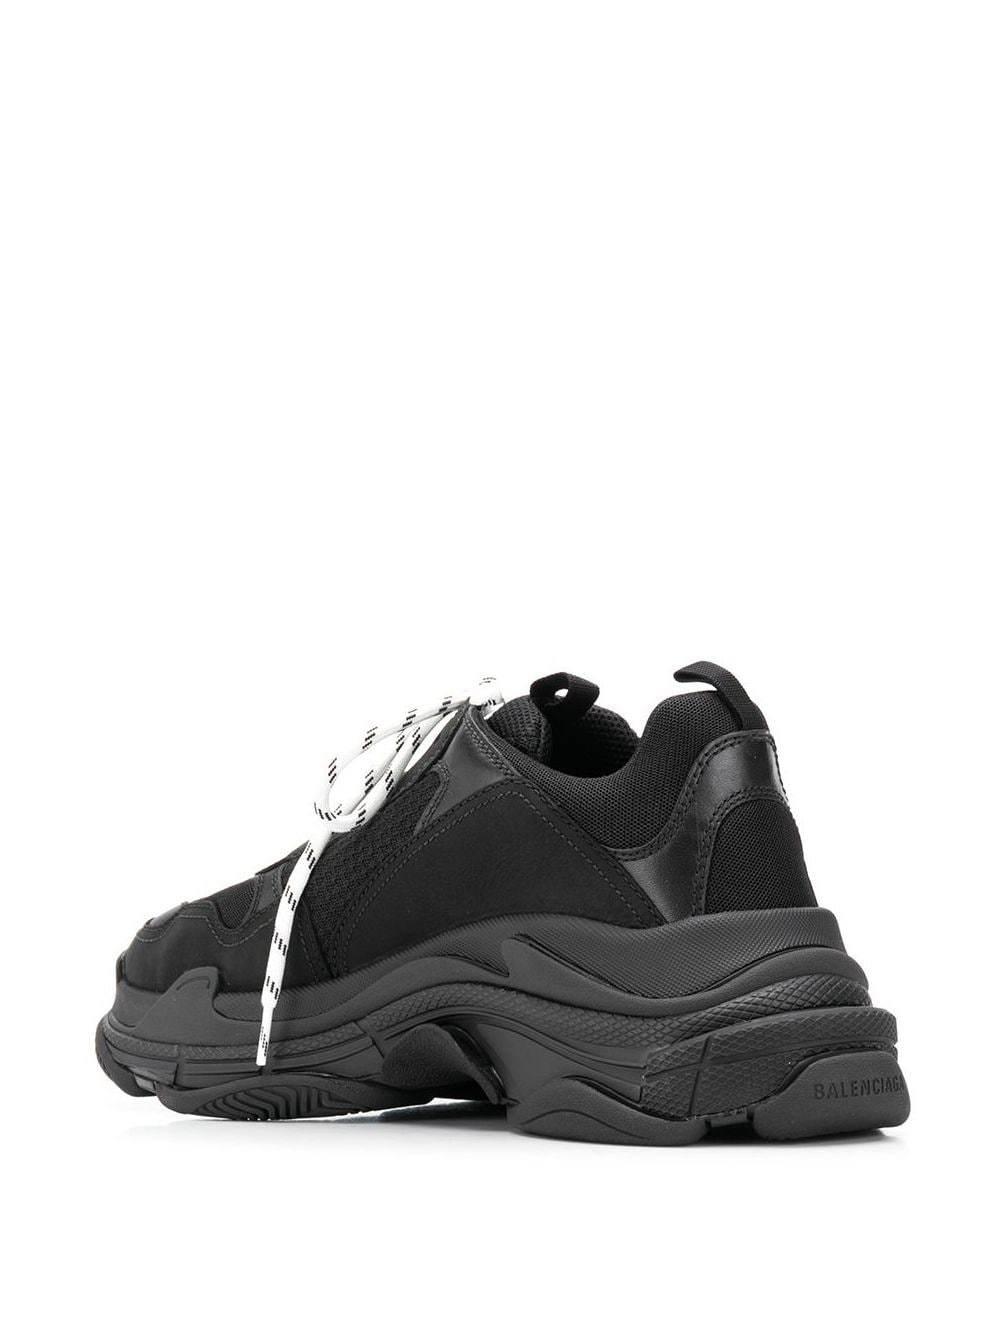 Balenciaga Leather Triple S Sneakers Black for Men - Save 26% | Lyst